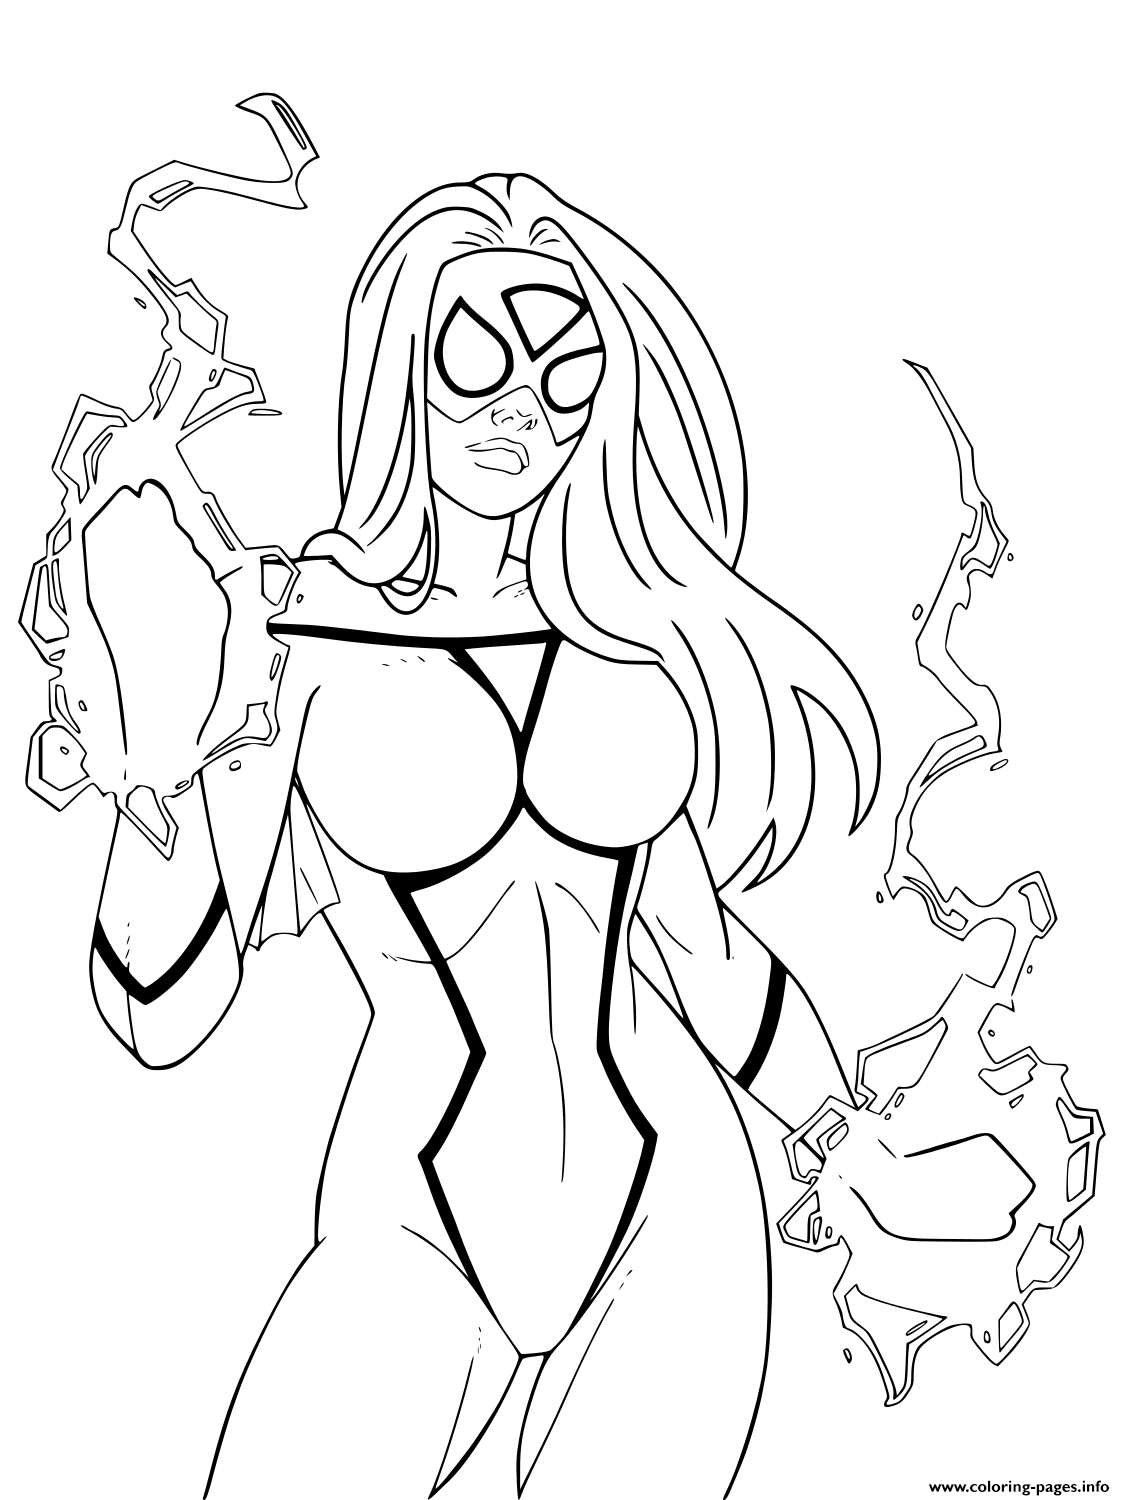 Gwen Stacy Get Her Powers Coloring ...coloring-pages.info